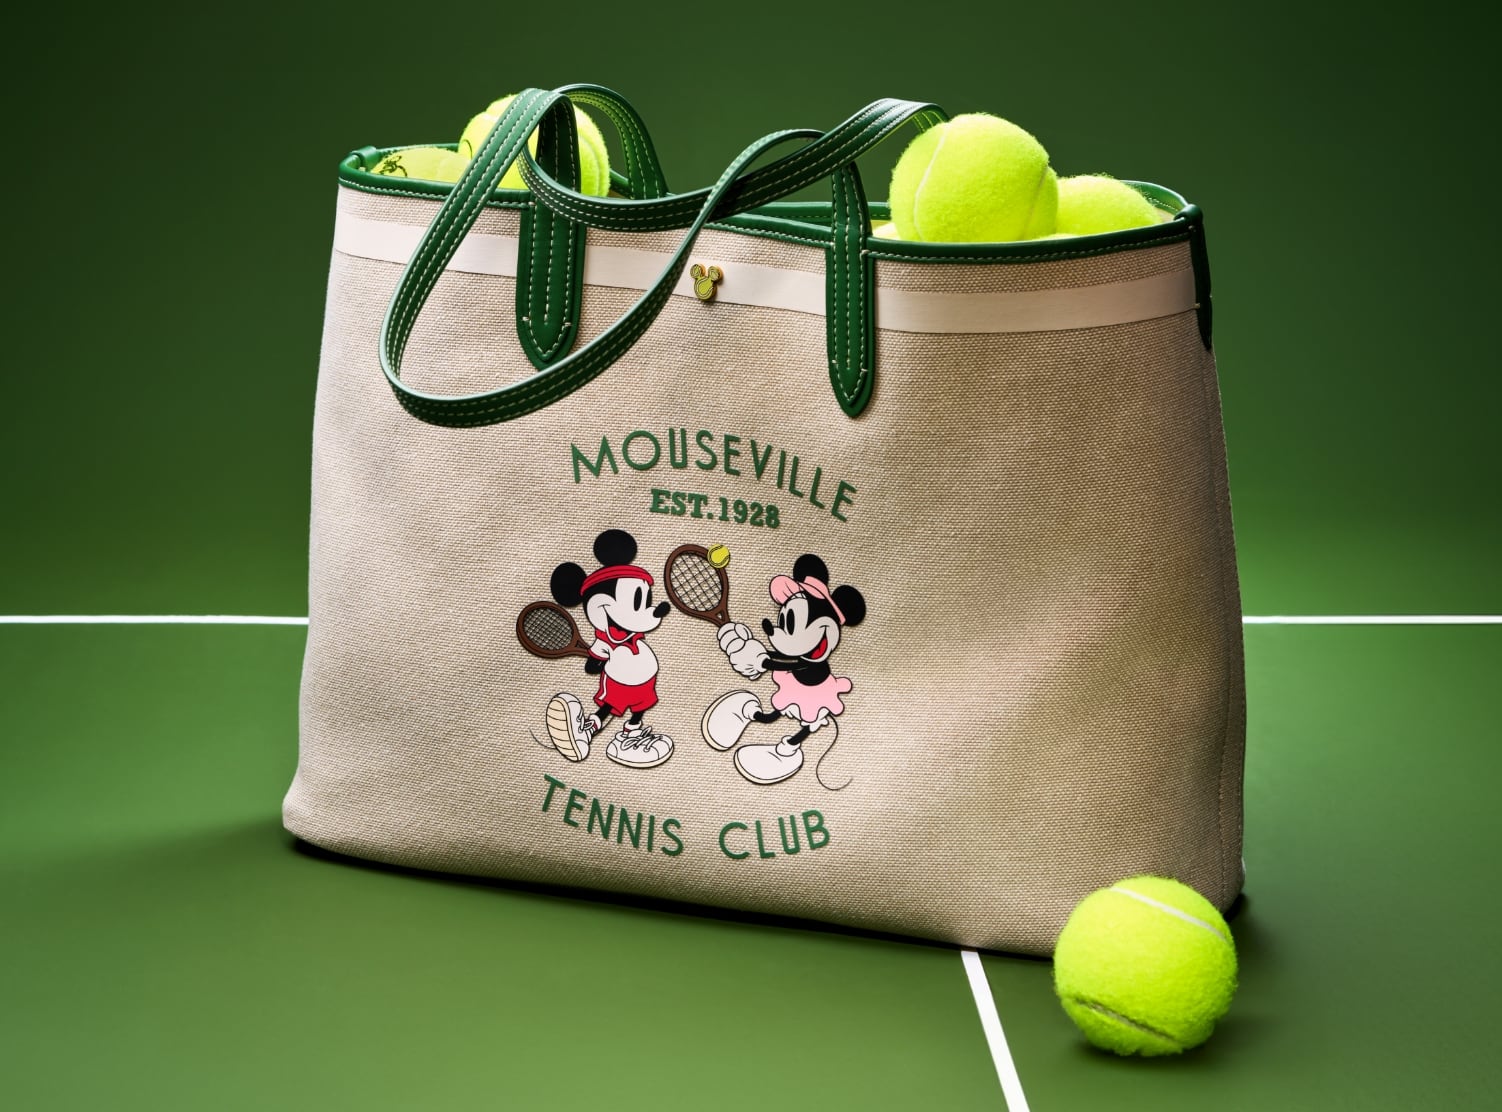 A closeup of our special-edition mini crossbody handbag, a round silhouette in green leather featuring a screenprinted graphic of Mickey and Minnie playing tennis.